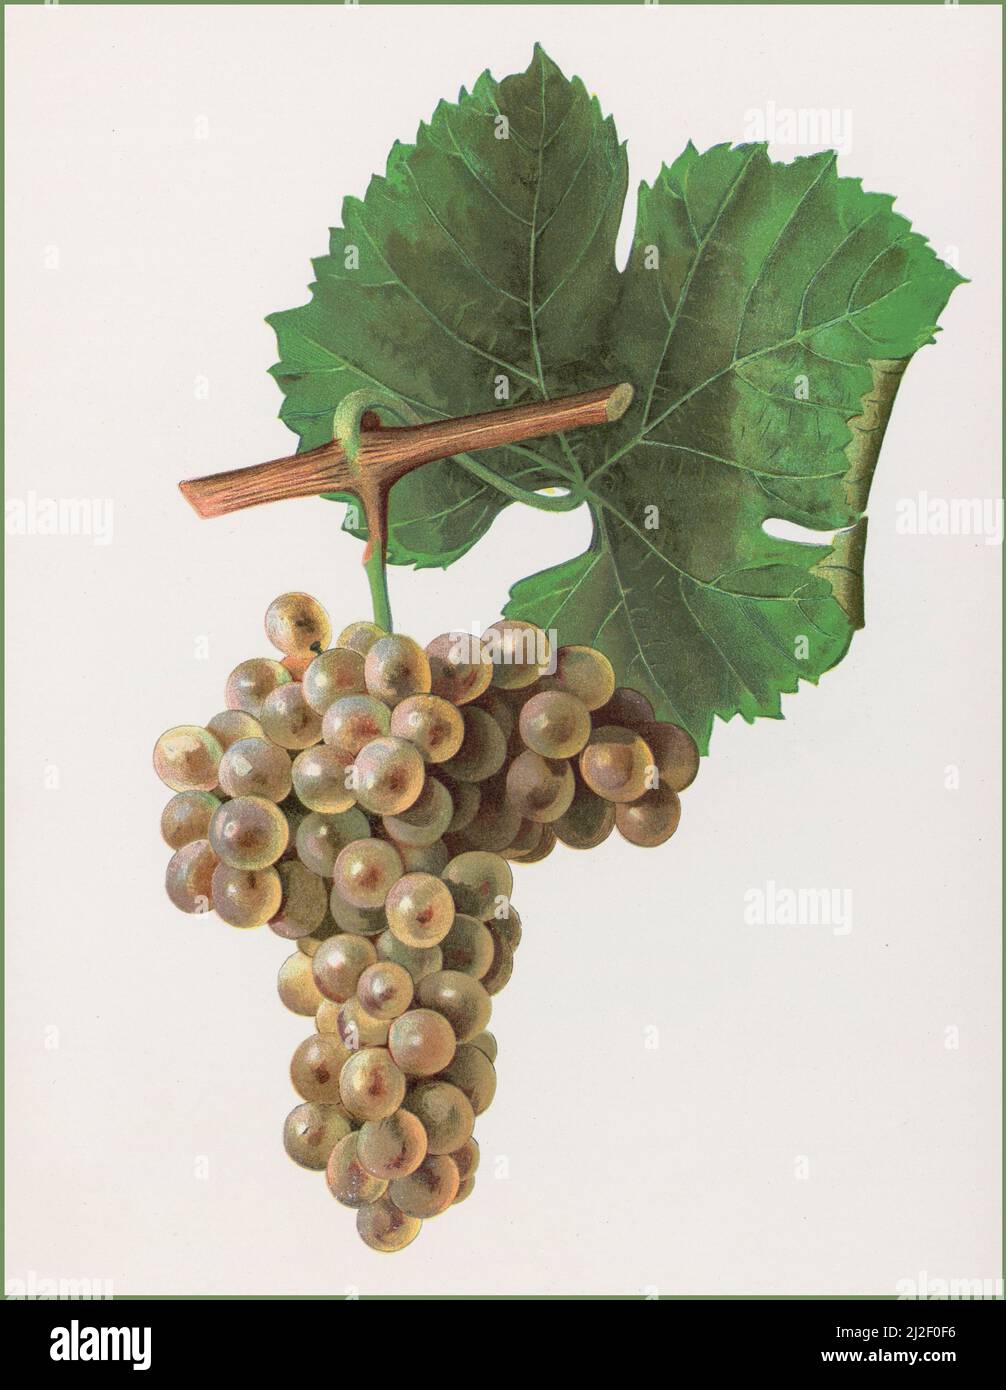 VIOGNIER GRAPES Vintage 1900s Lithograph illustration of a bunch of Viognier grapes. Viognier is a white wine grape variety. It is the only permitted grape for the French wine Condrieu in the Rhône Valley. Outside of the Rhône, Viognier can be found in regions of North and South America as well as Australia, New Zealand, the Cape Winelands in South Africa and Israel. Stock Photo